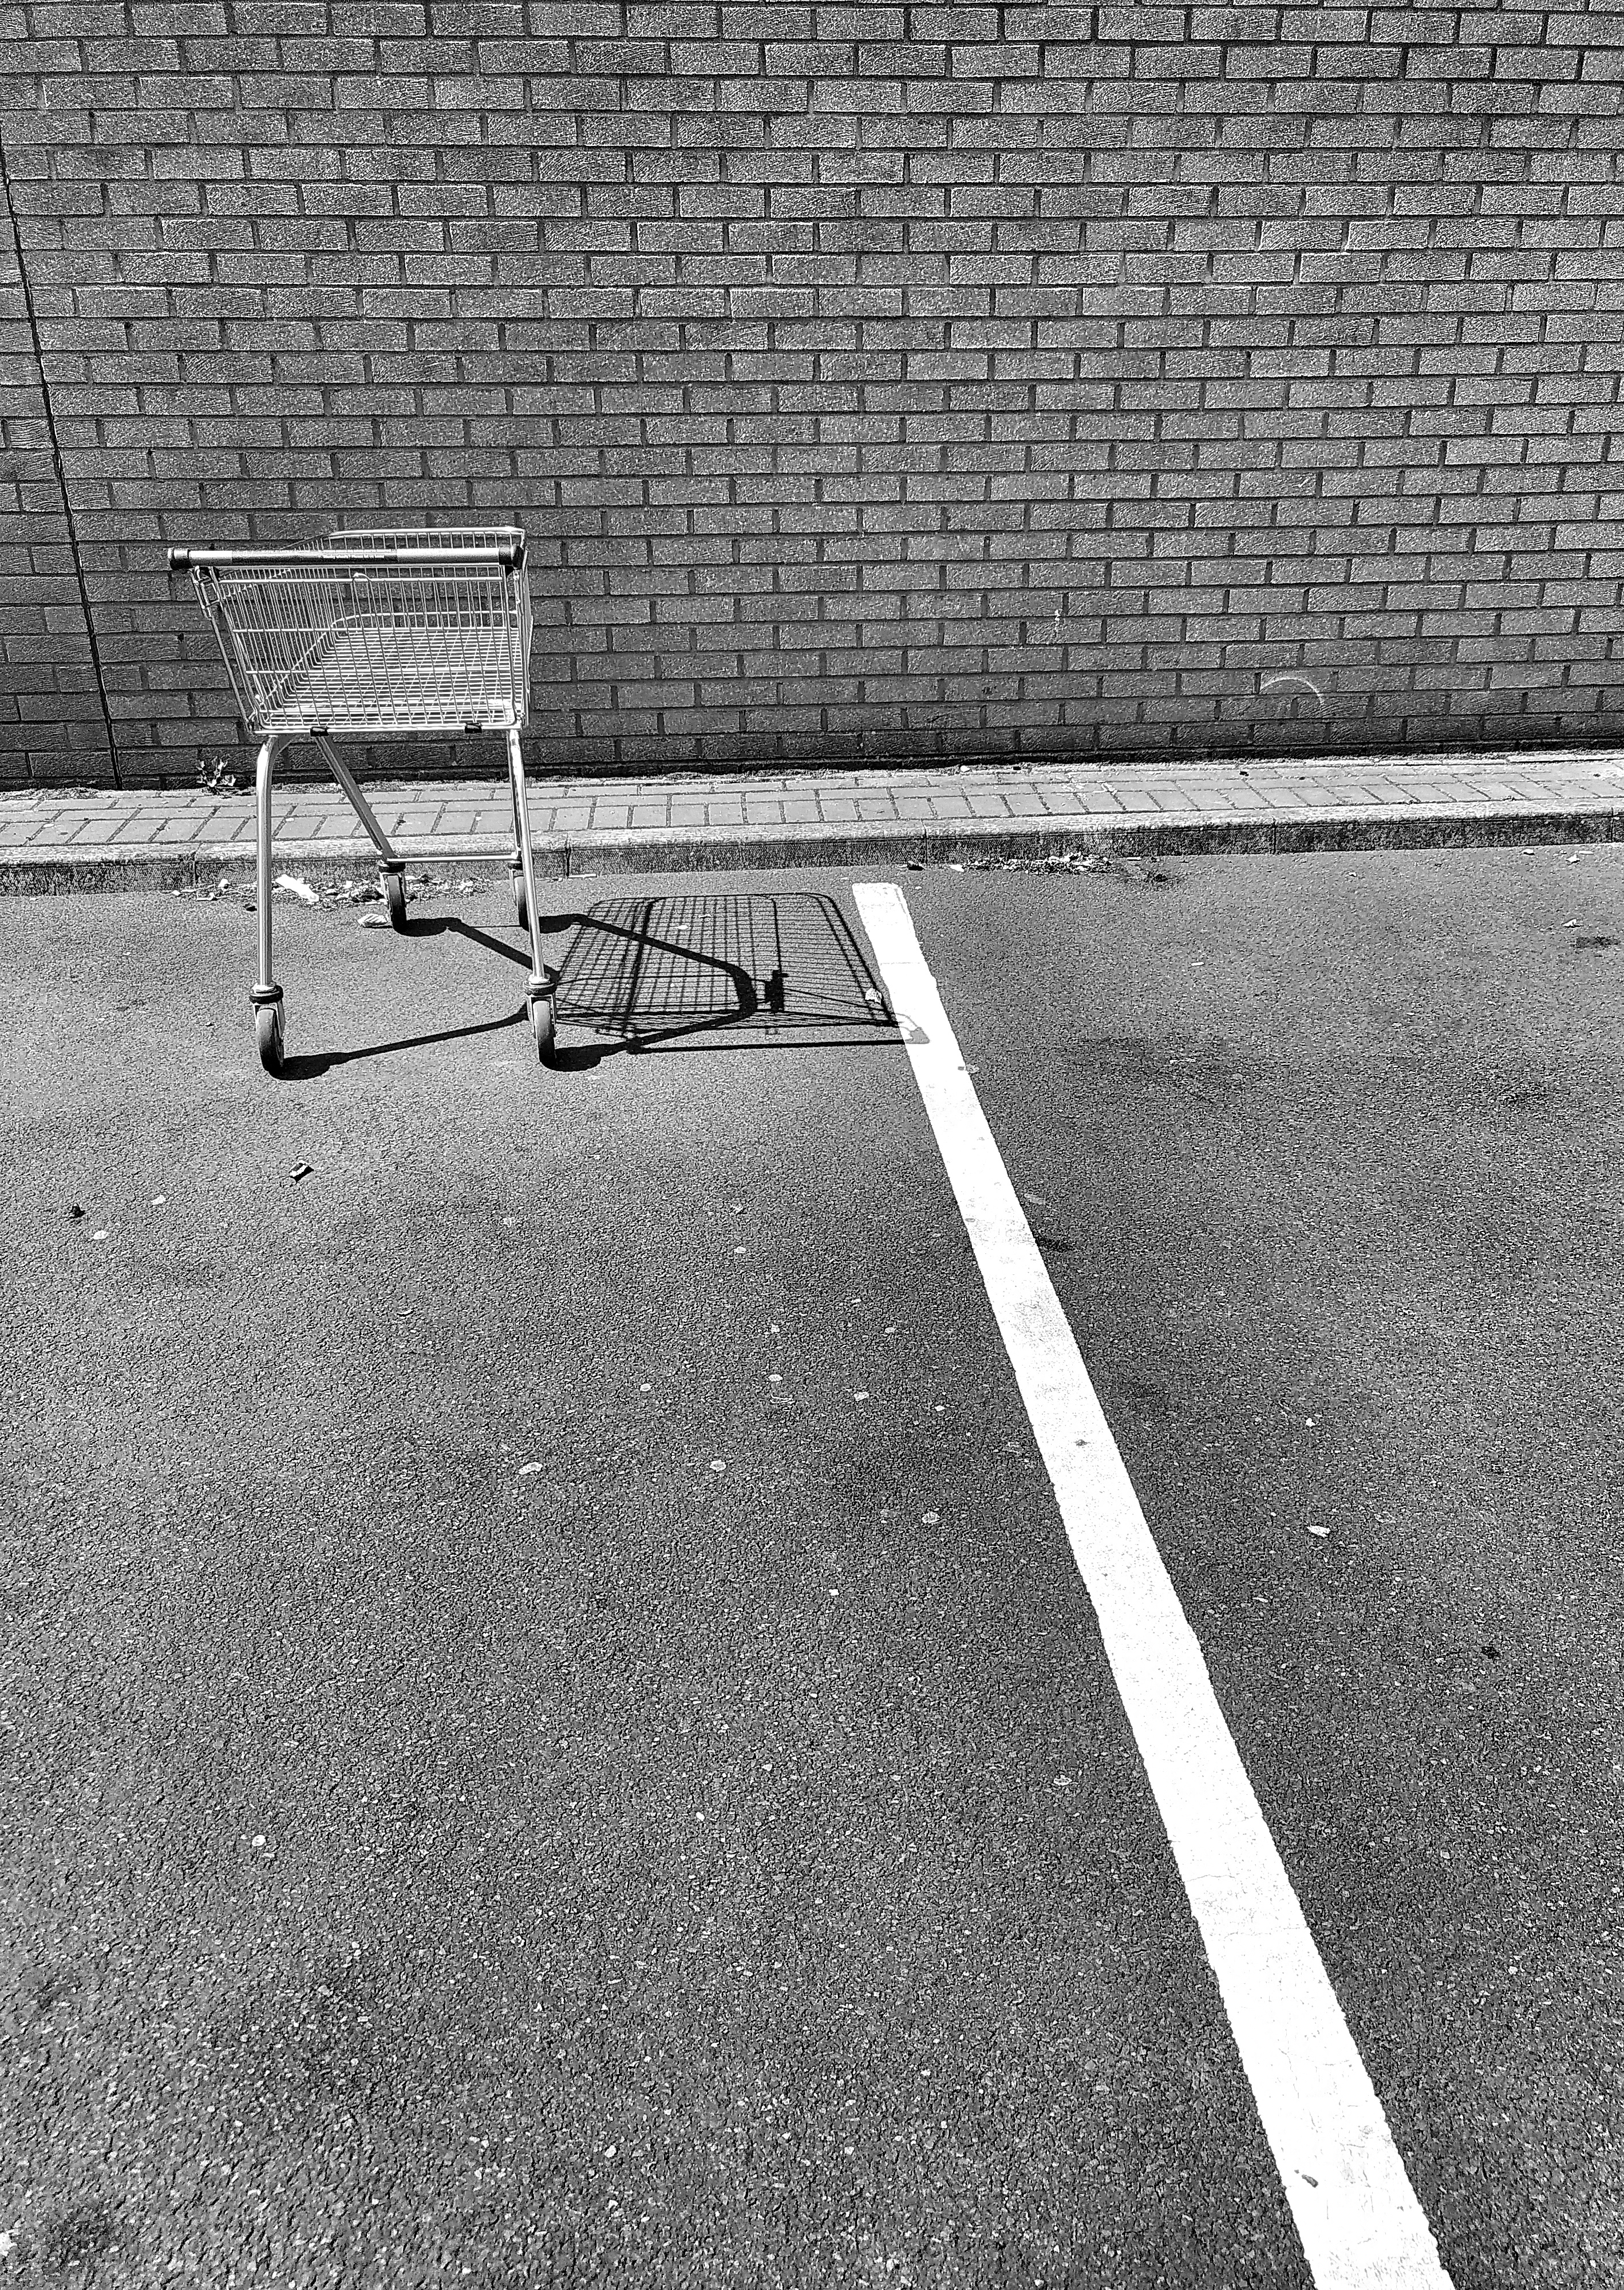 a shopping tolly parked in a car parking space with a shadow cast on the ground